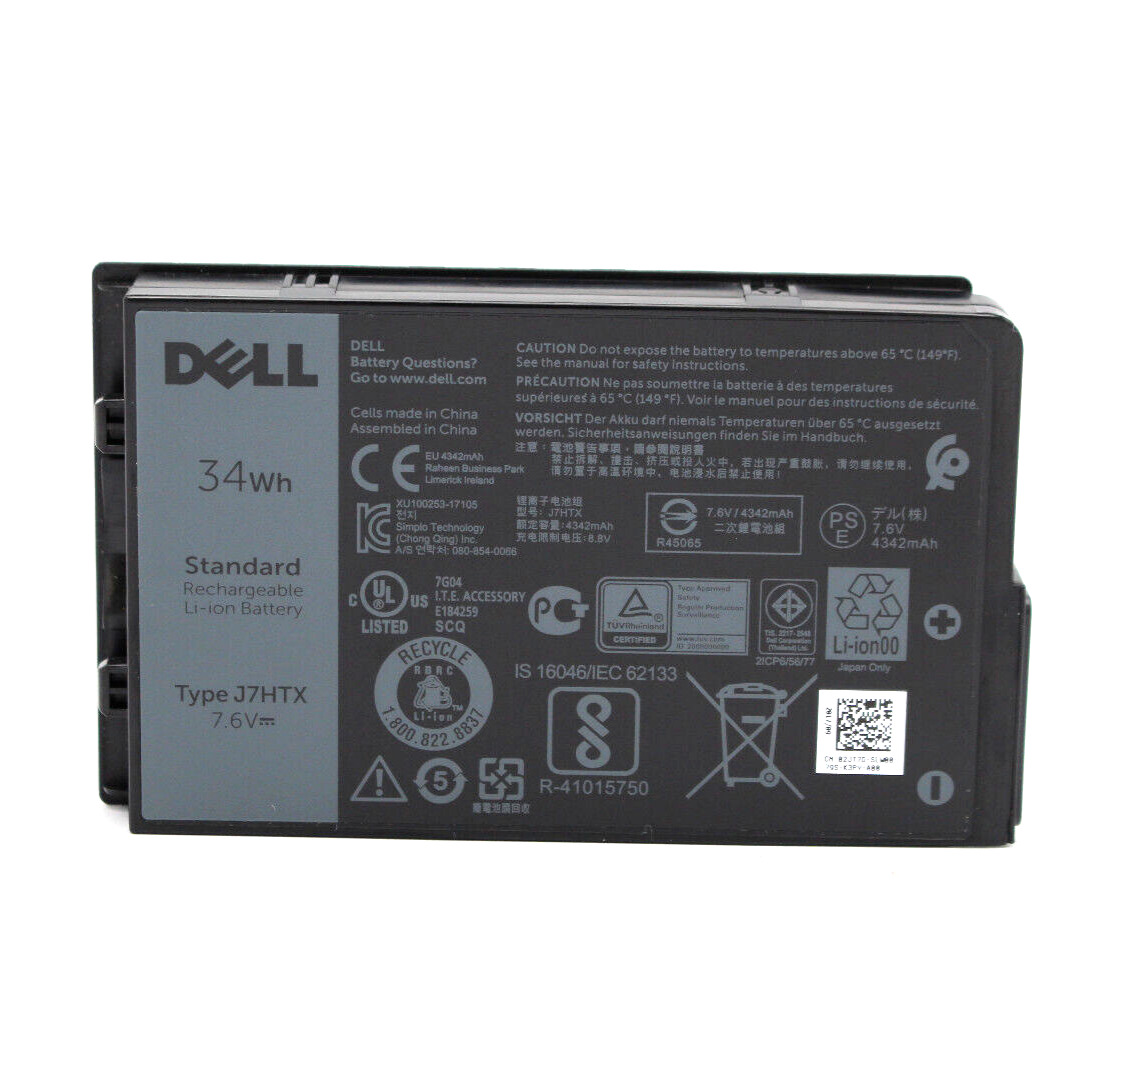 Lot of 5 ORIGINAL DELL Battery for Latitude 7202 for Rugged Tablet J7HTX Used